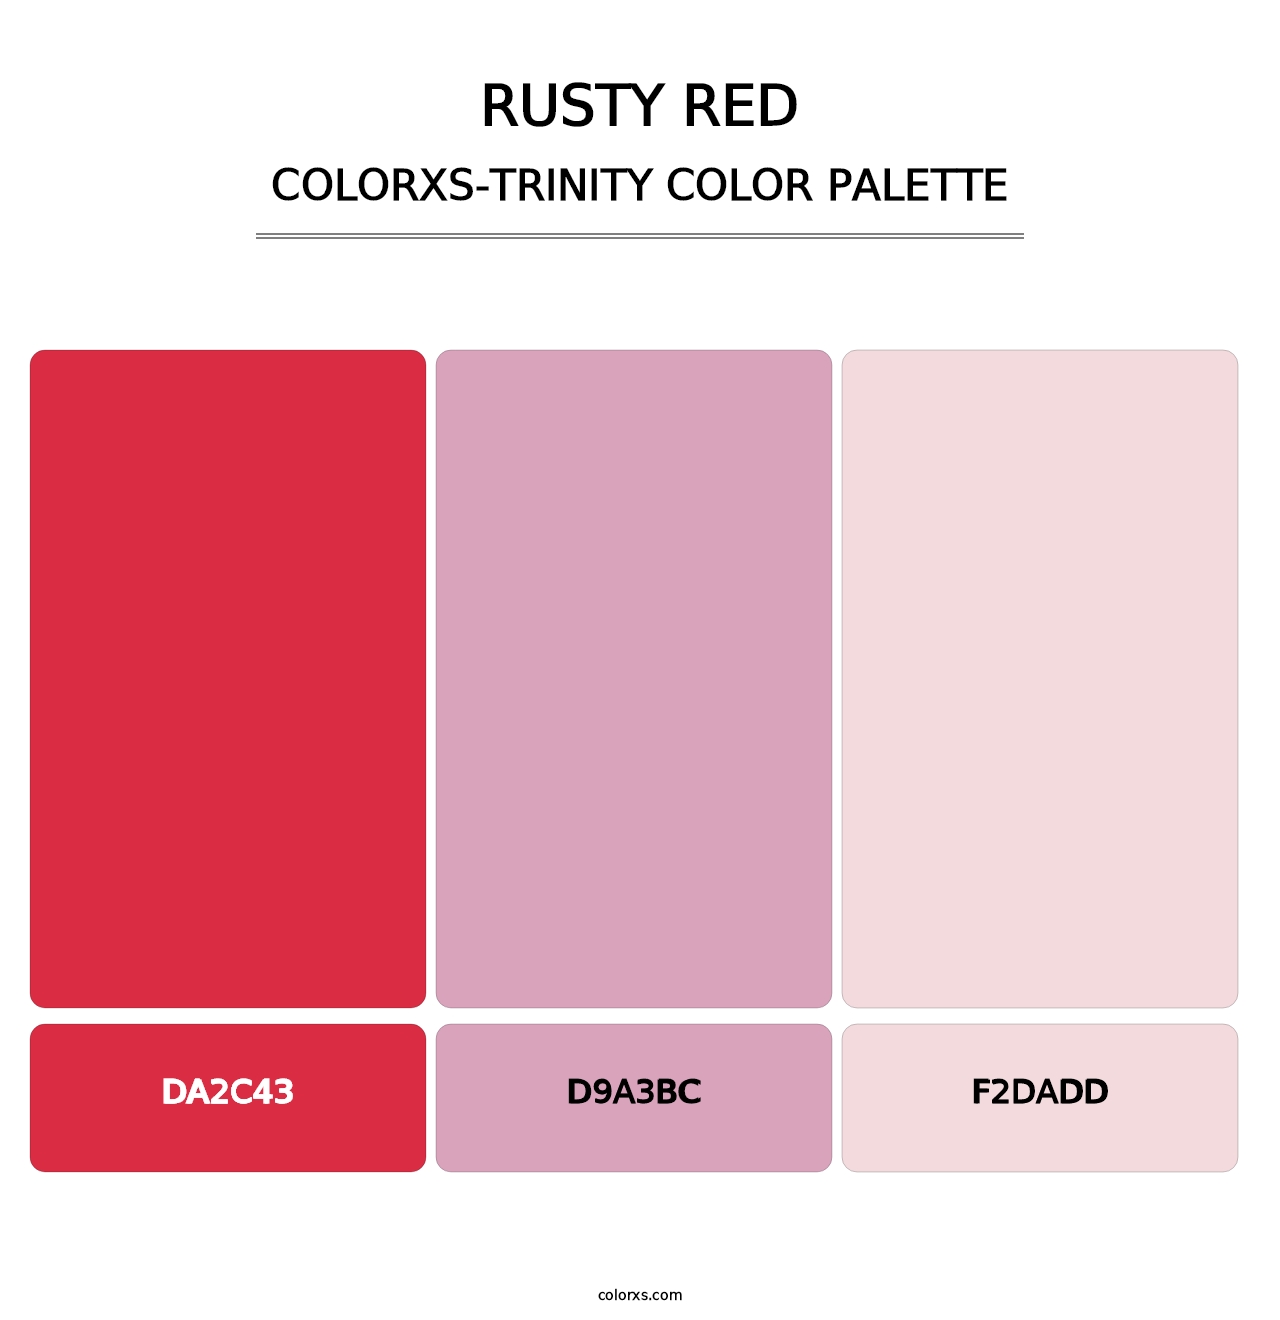 Rusty Red - Colorxs Trinity Palette